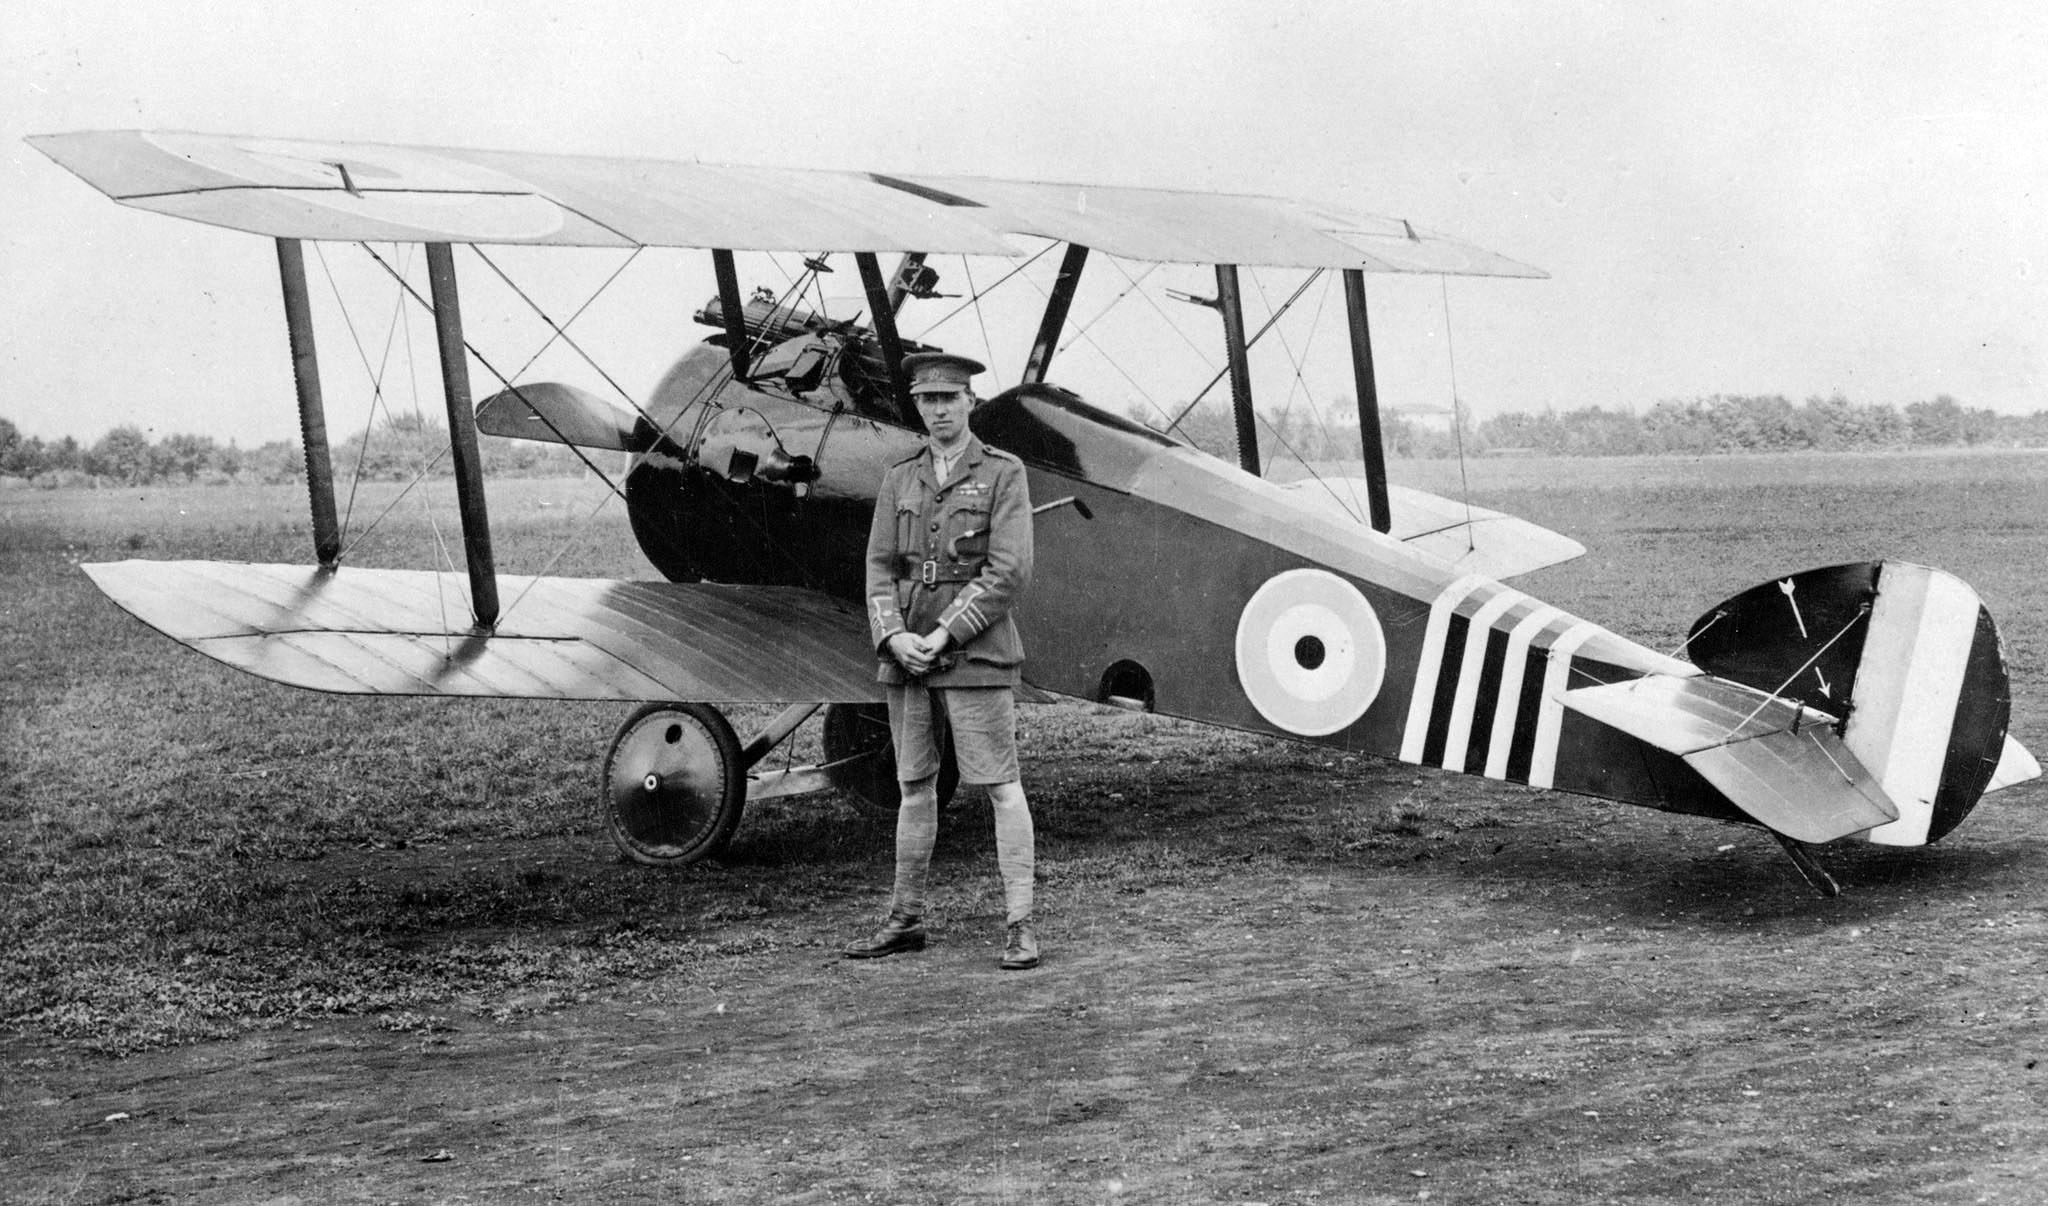 An old black and white photograph of a man in military uniform standing in front of a bi-plane. 